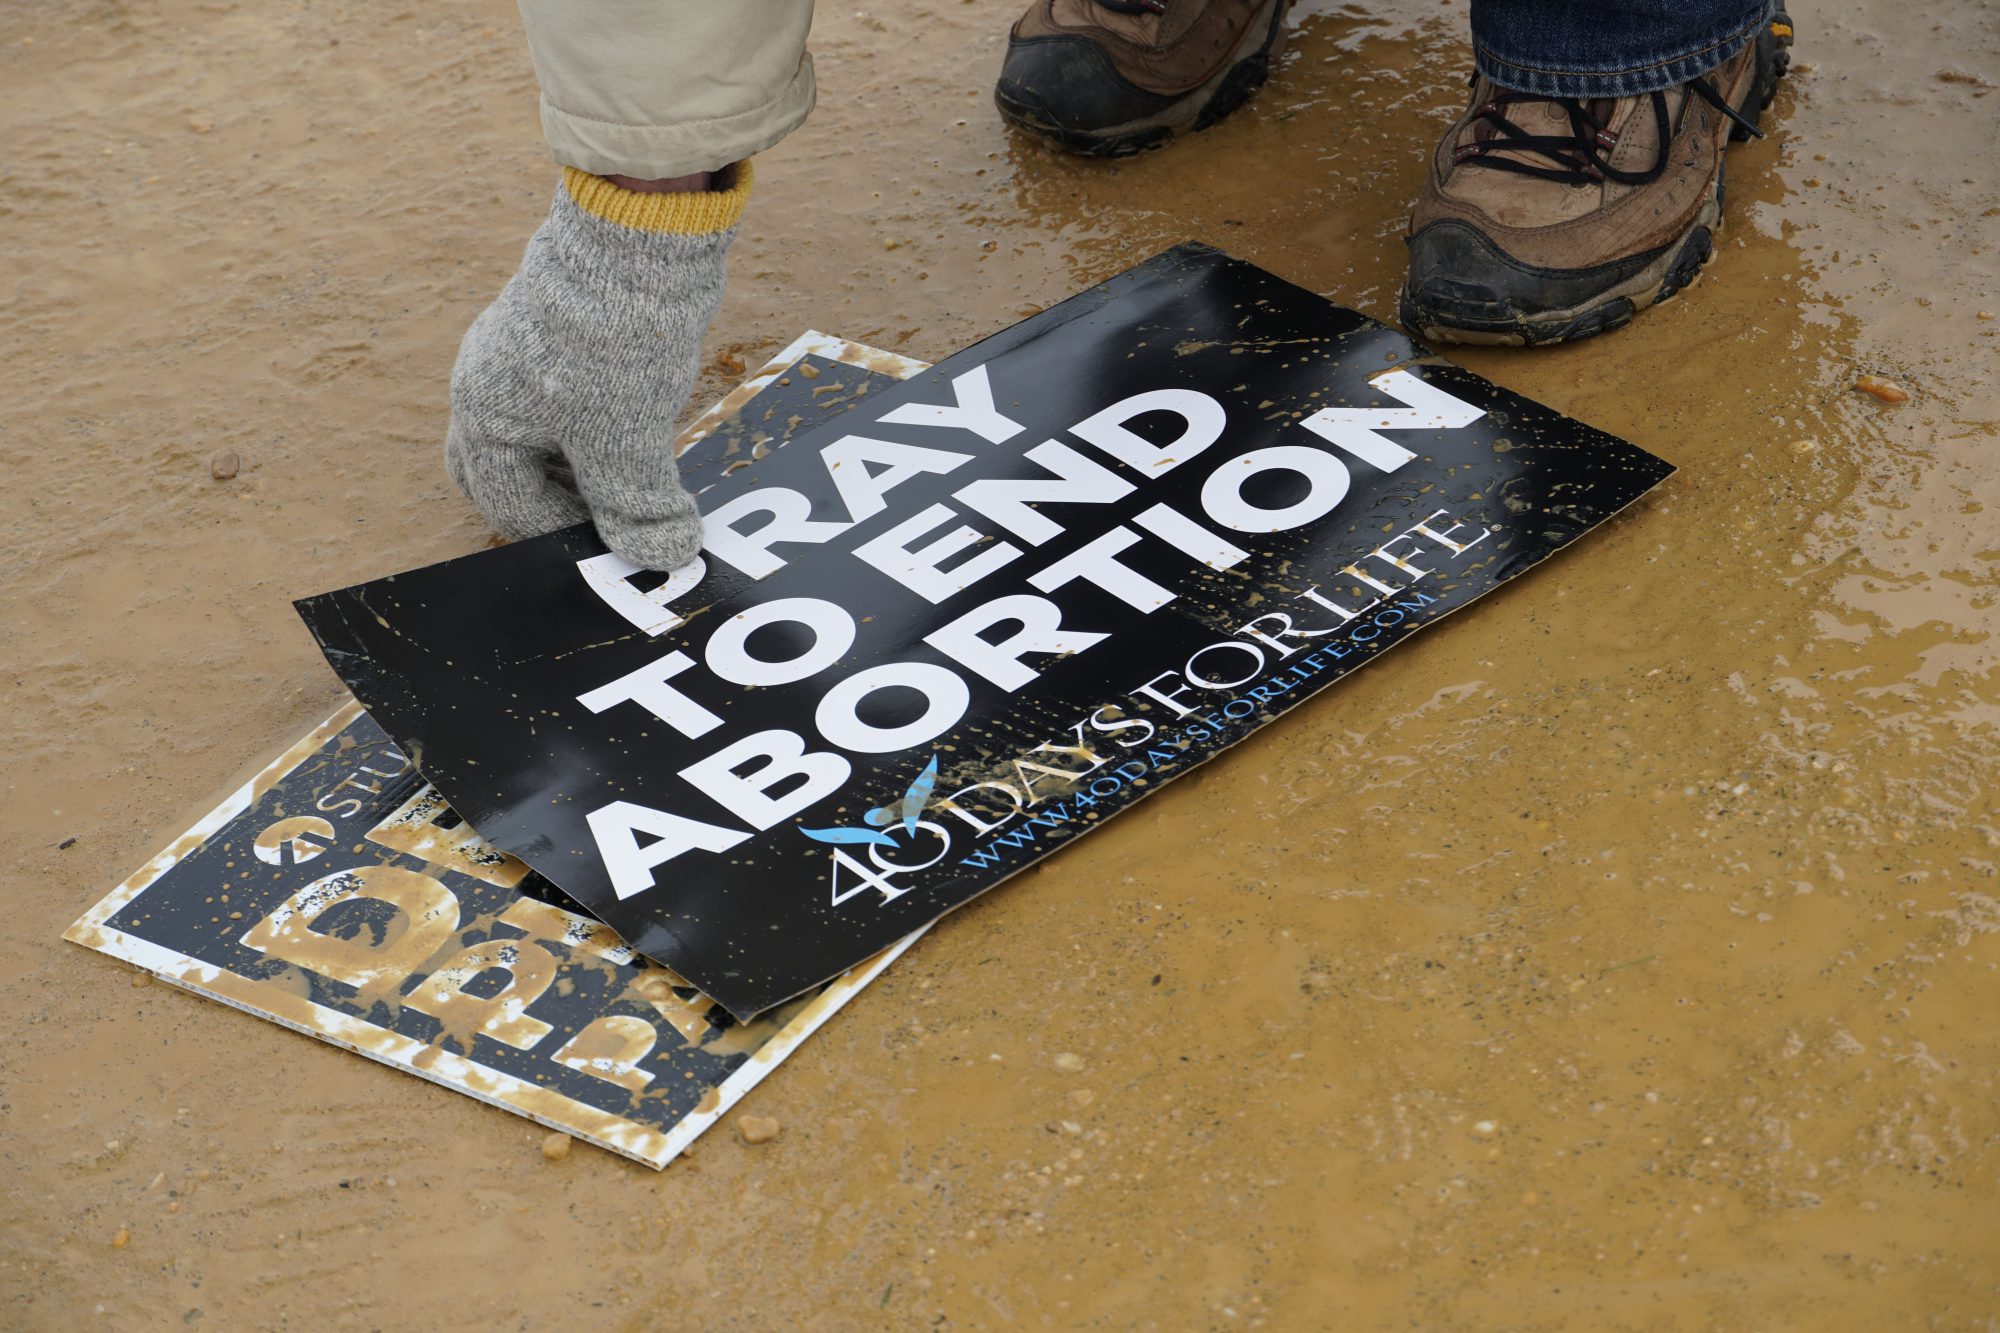 After the march, volunteers picked up anti-abortion signs that were dropped. (Ester Wells/MNS)